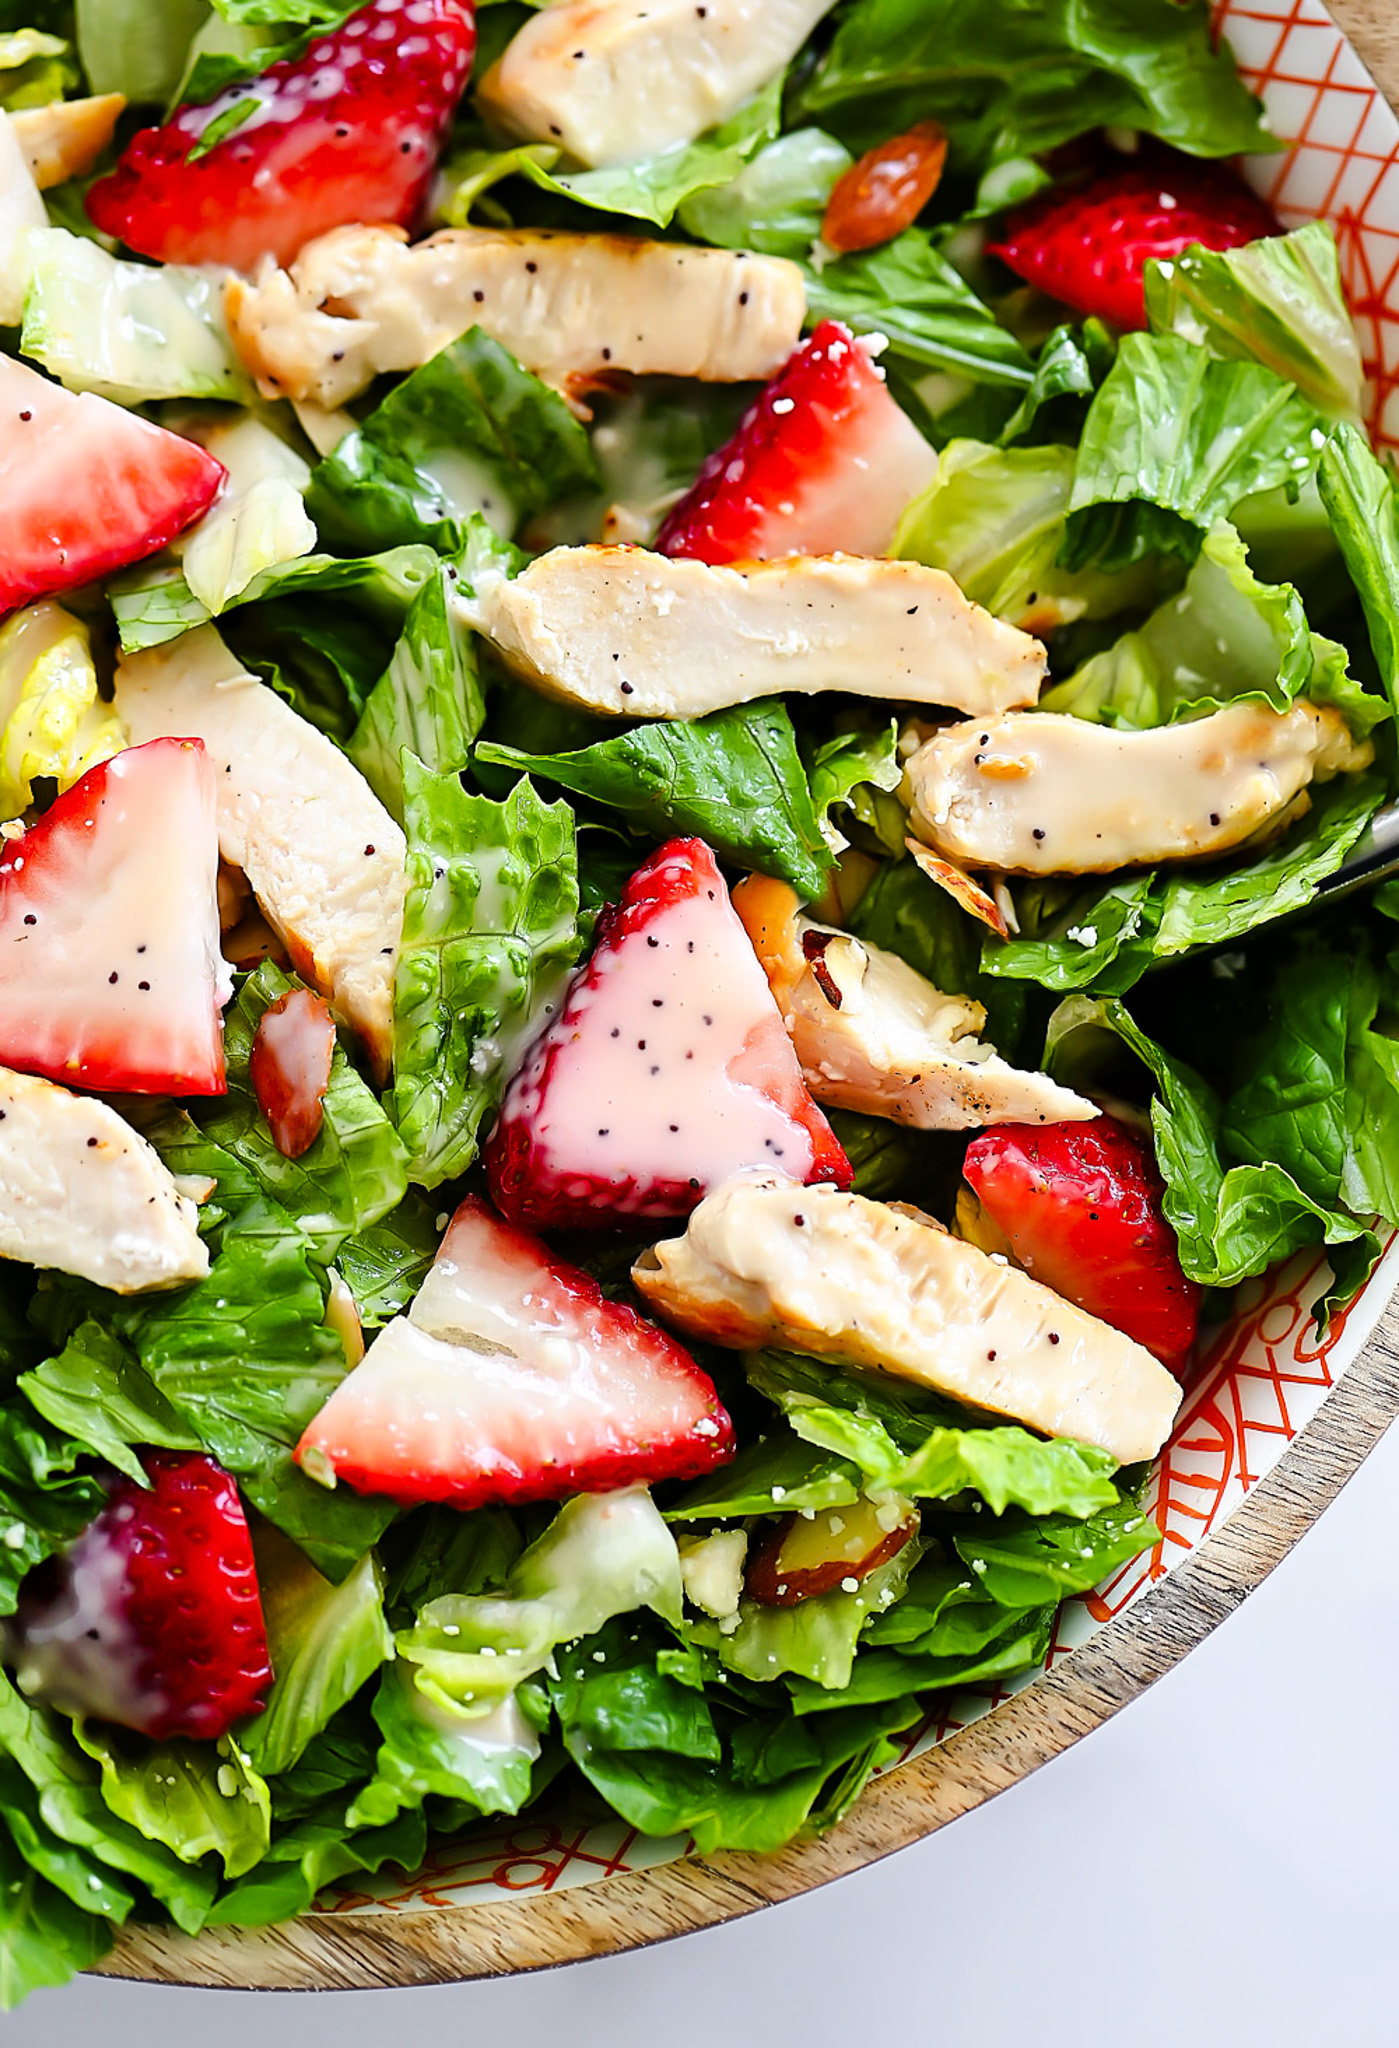 Strawberry Chicken Salad is filled with chopped romaine lettuce, sprinkles of sliced almonds, sliced strawberries and grilled chicken.